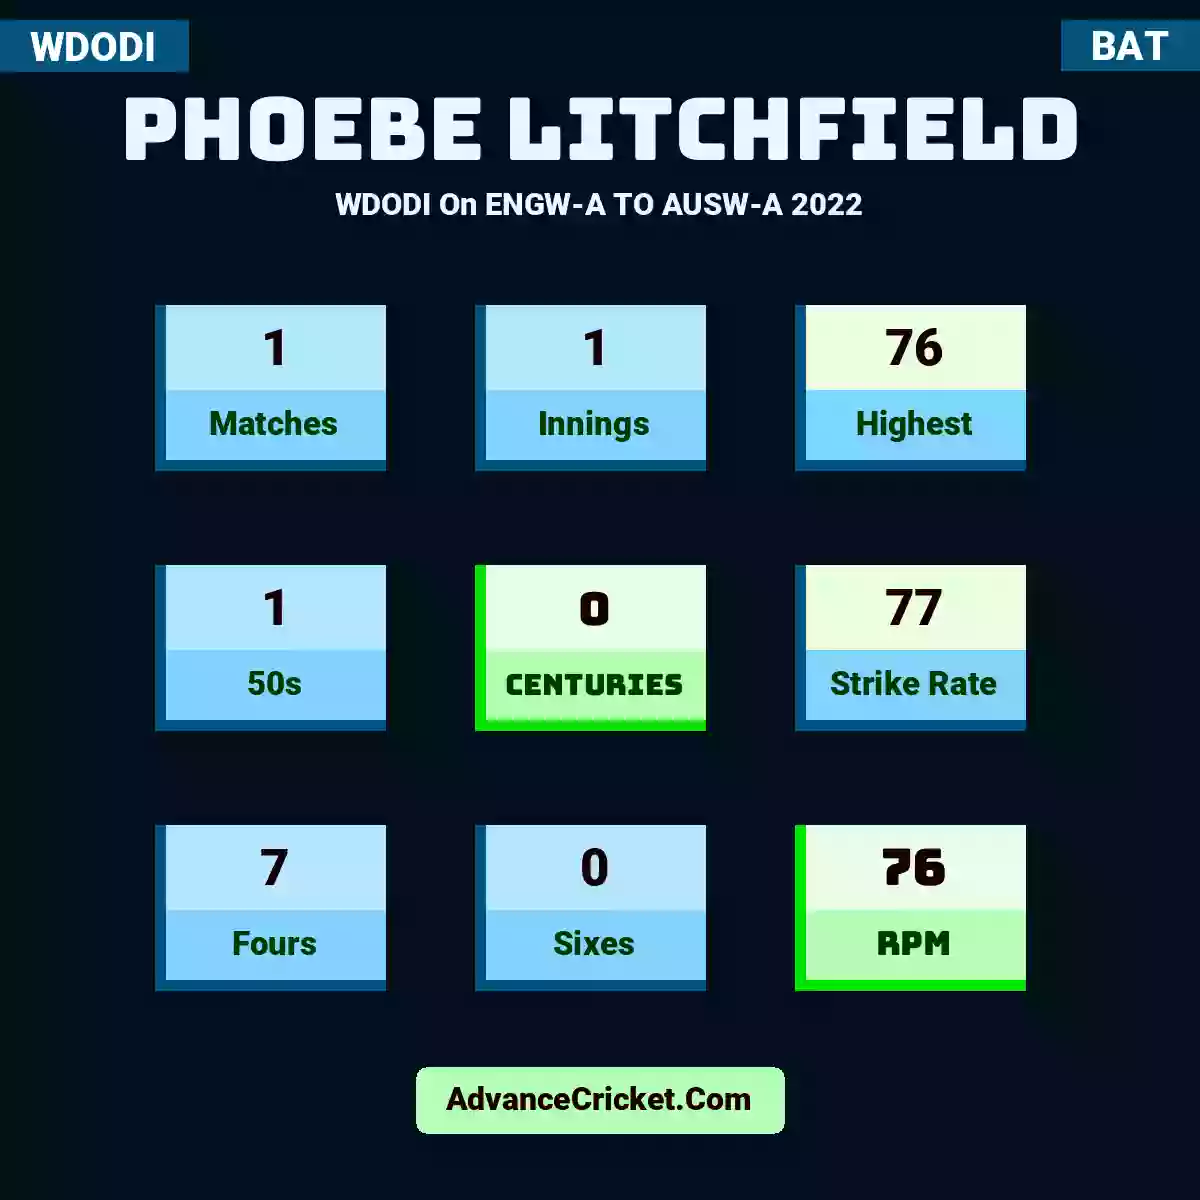 Phoebe Litchfield WDODI  On ENGW-A TO AUSW-A 2022, Phoebe Litchfield played 1 matches, scored 76 runs as highest, 1 half-centuries, and 0 centuries, with a strike rate of 77. P.Litchfield hit 7 fours and 0 sixes, with an RPM of 76.